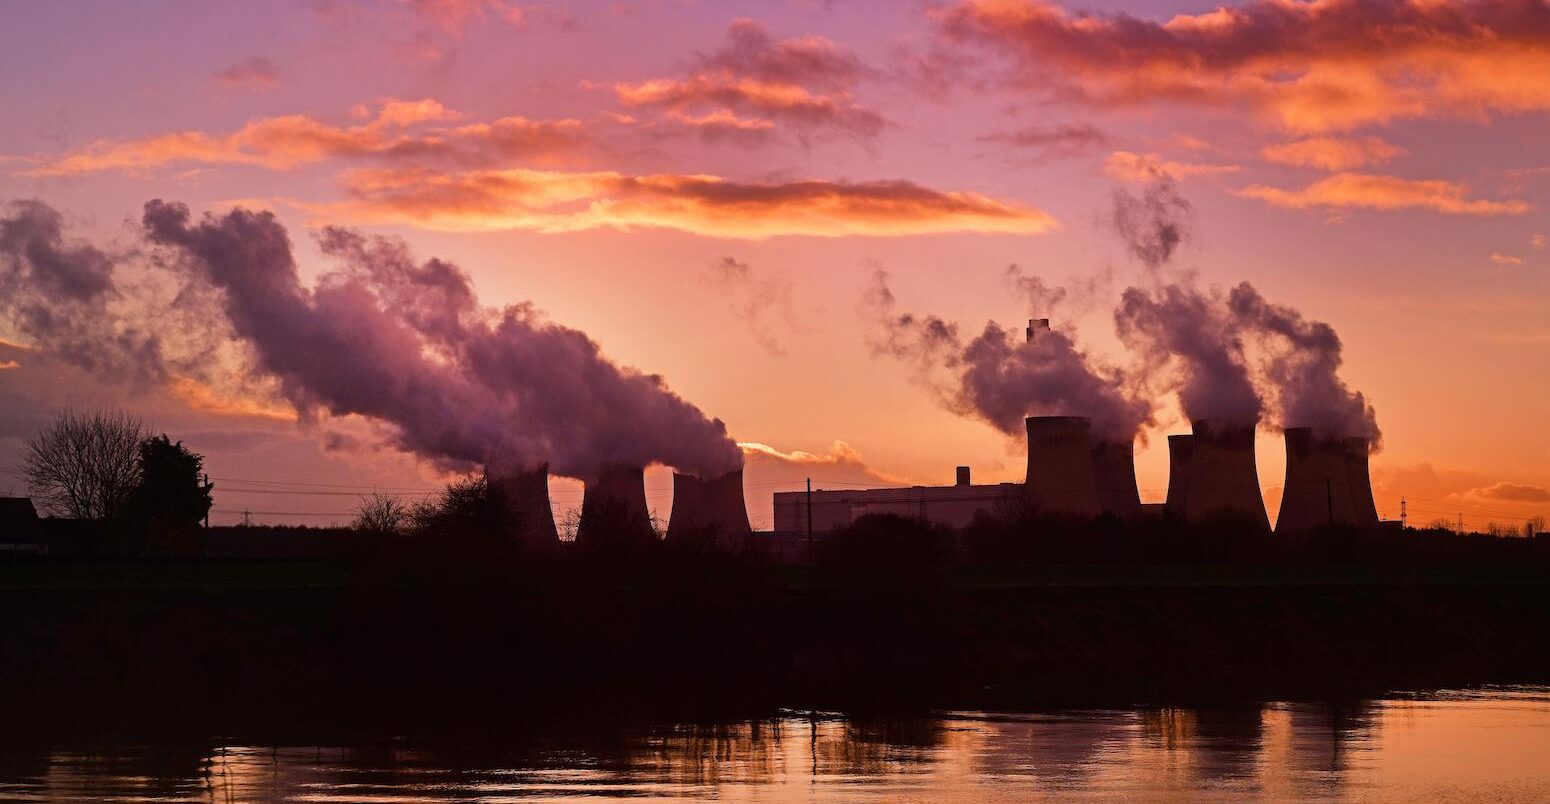 A Drax coal powered power station by the River Ouse in Yorkshire, UK. Credit: Paul Ridsdale / Alamy Stock Photo